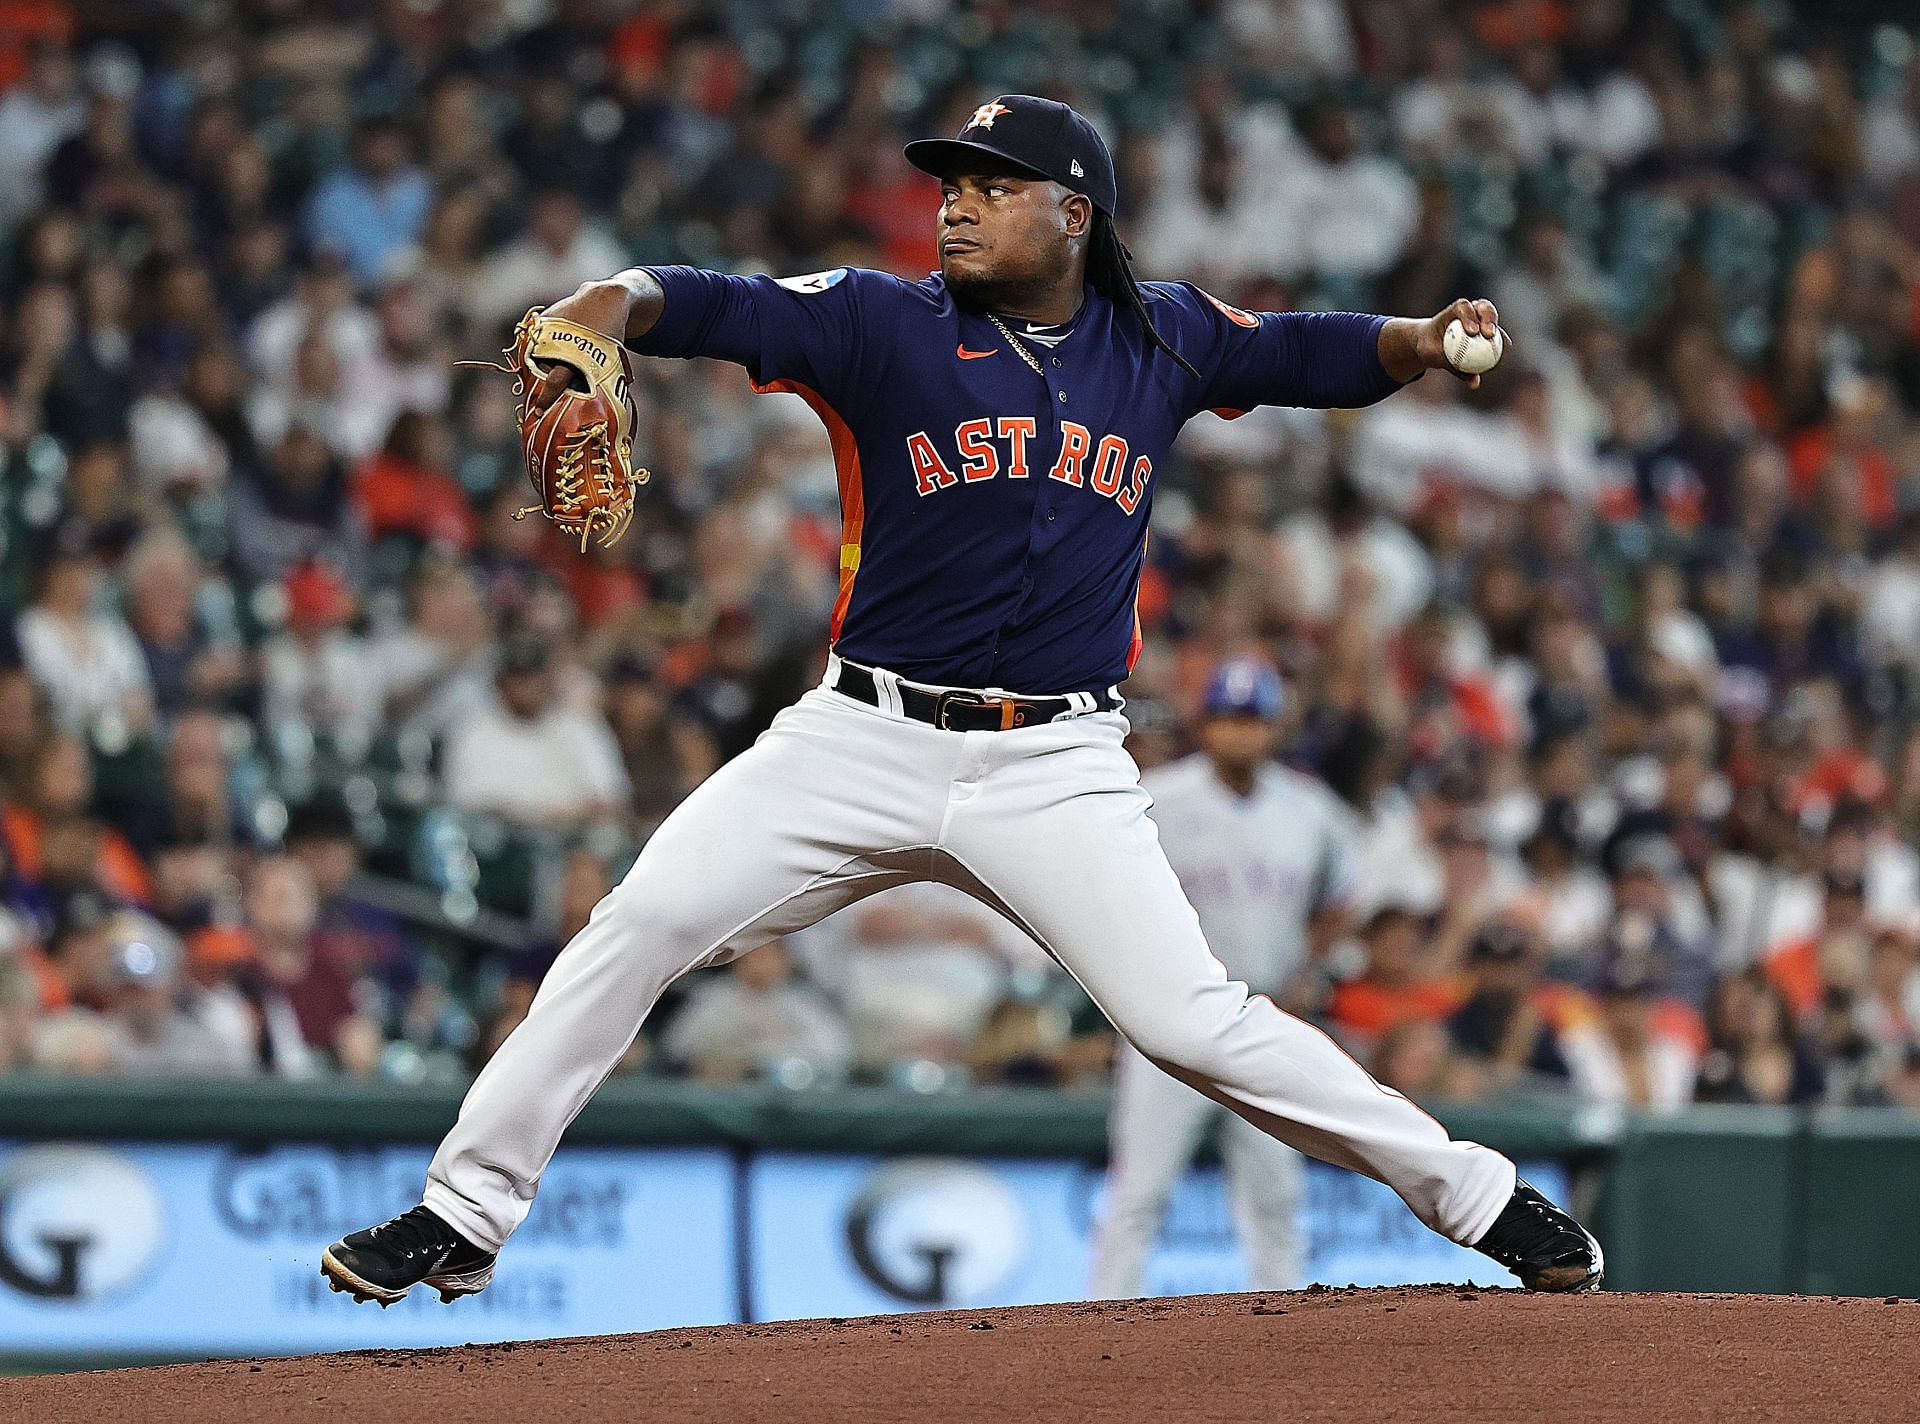 Framber Valdez #59 of the Houston Astros pitches in the first inning against the Texas Rangers